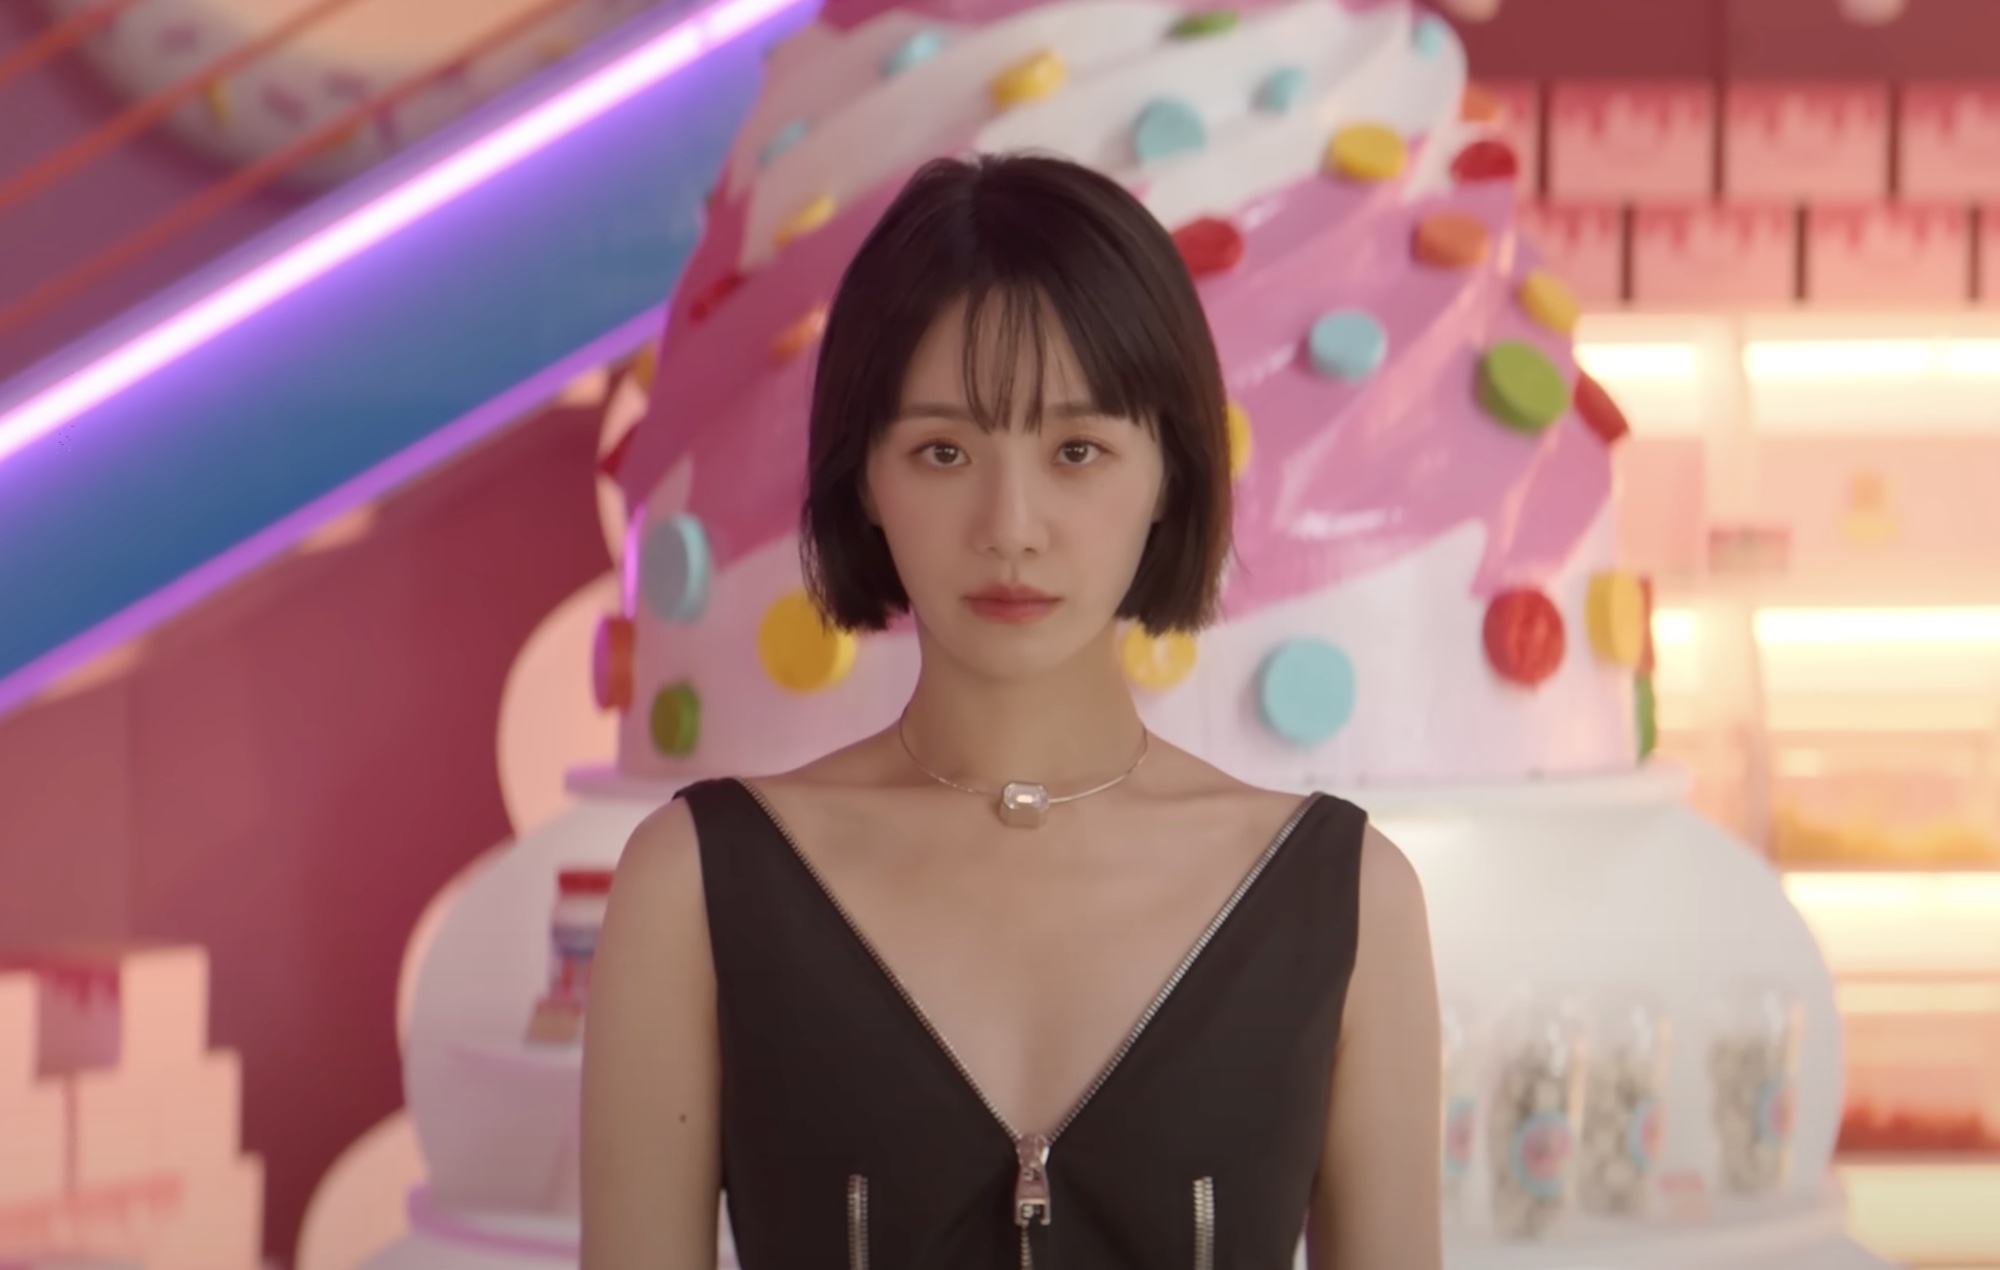 fame-is-deadly-in-the-teaser-for-netflix’s-new-k-drama-‘celebrity’